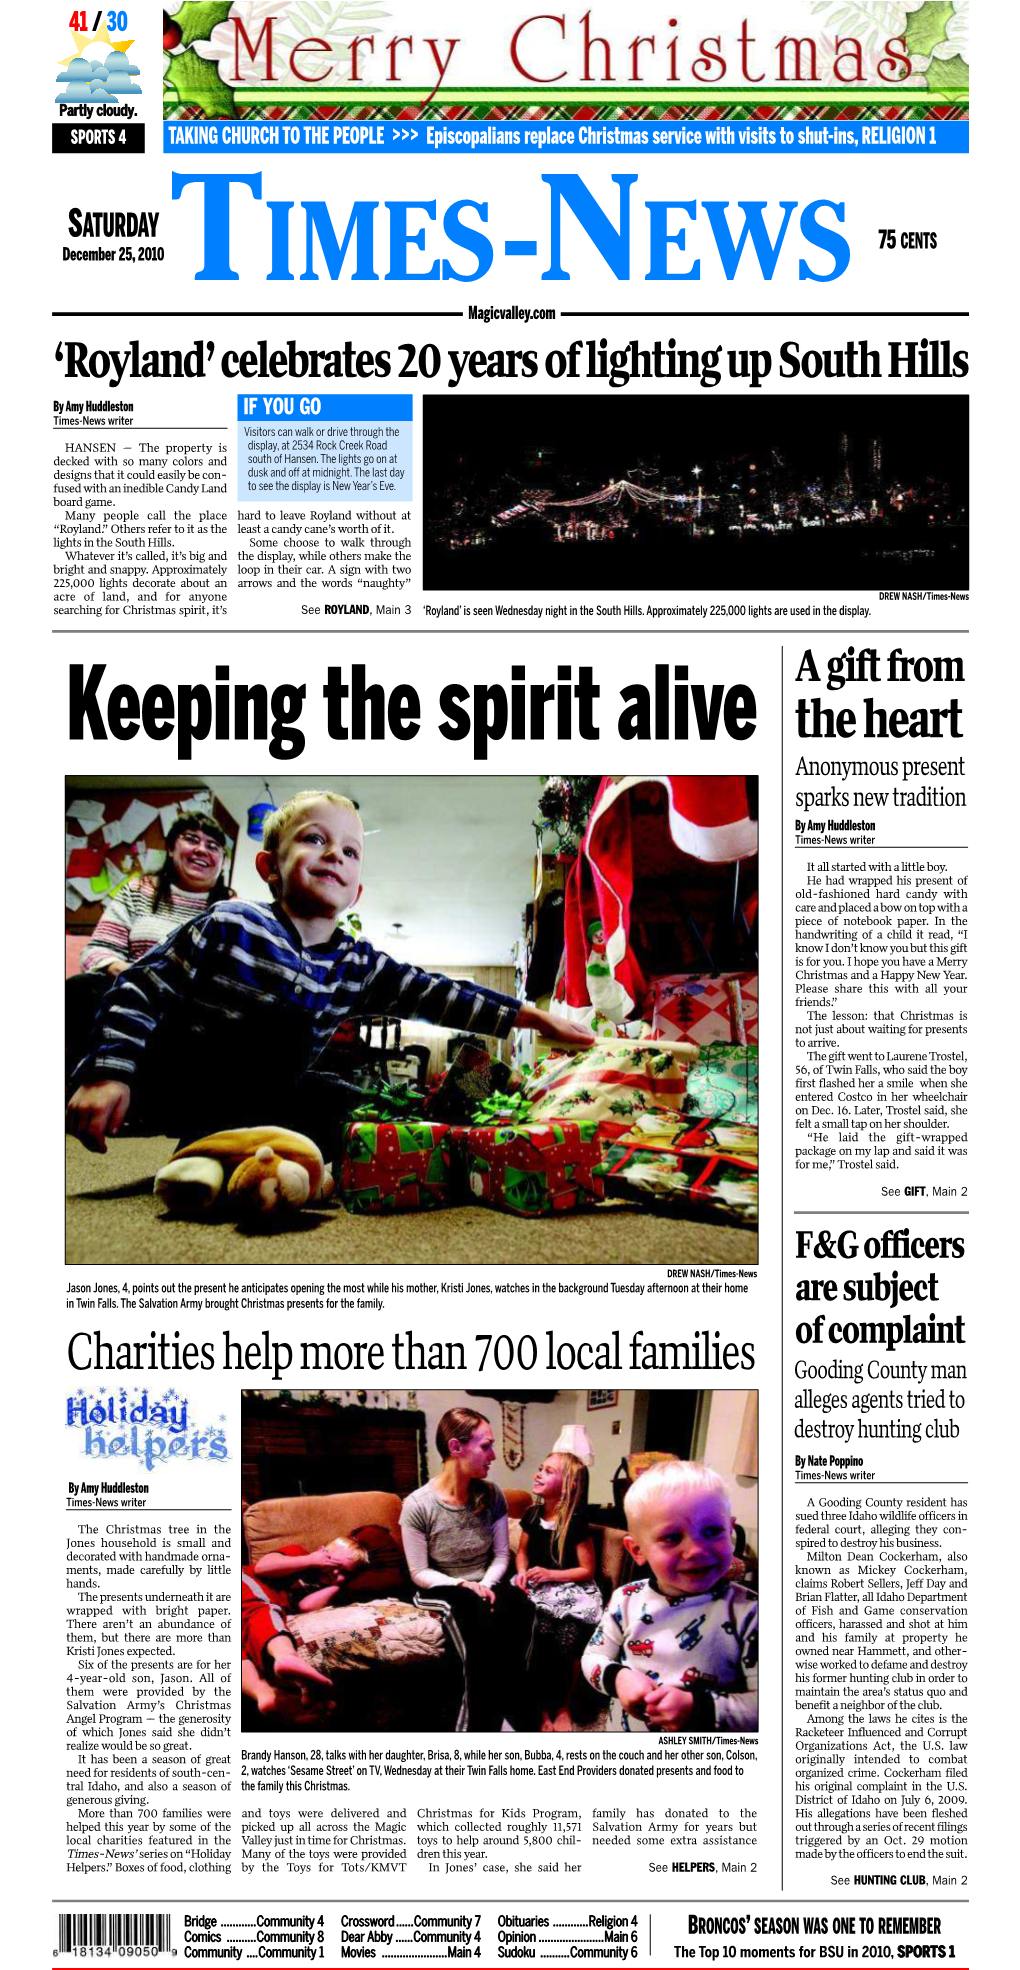 The Heart Anonymous Present Sparks New Tradition by Amy Huddleston Times-News Writer